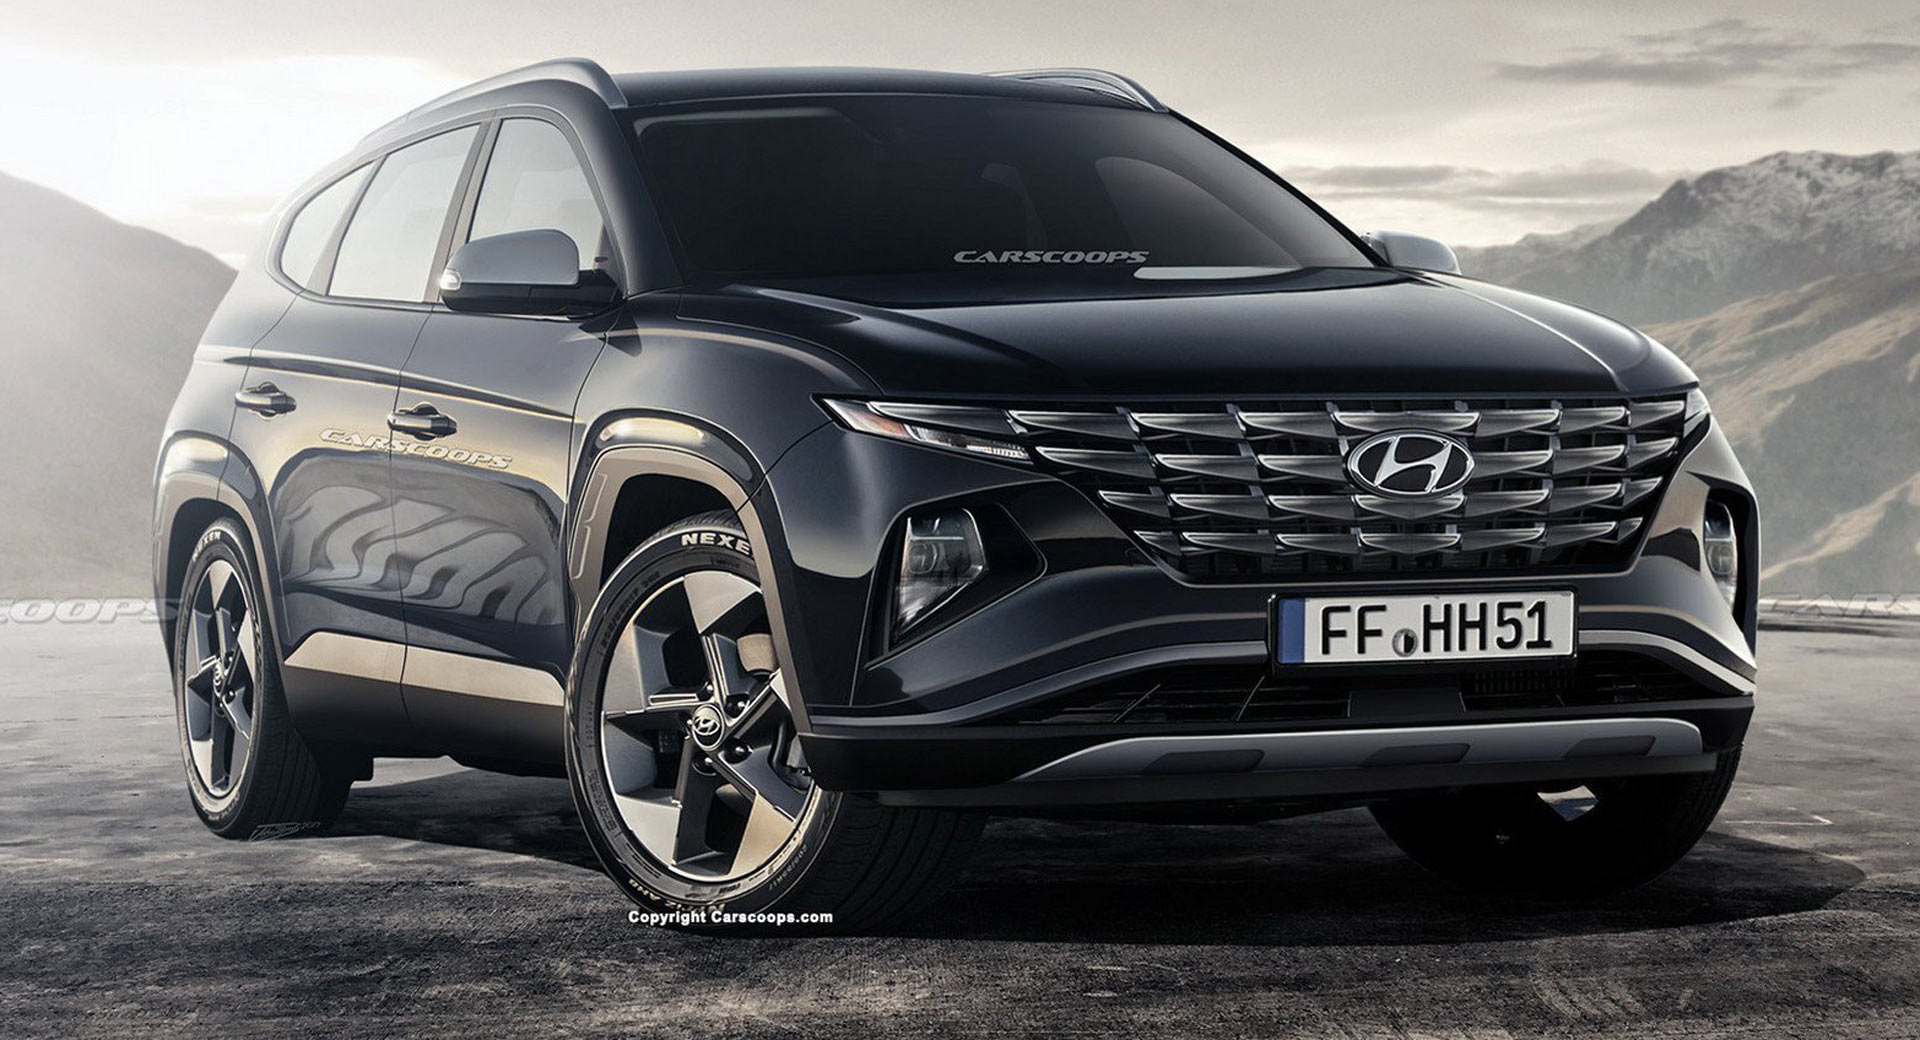 hyundai official says new 2021 tucson has a "very